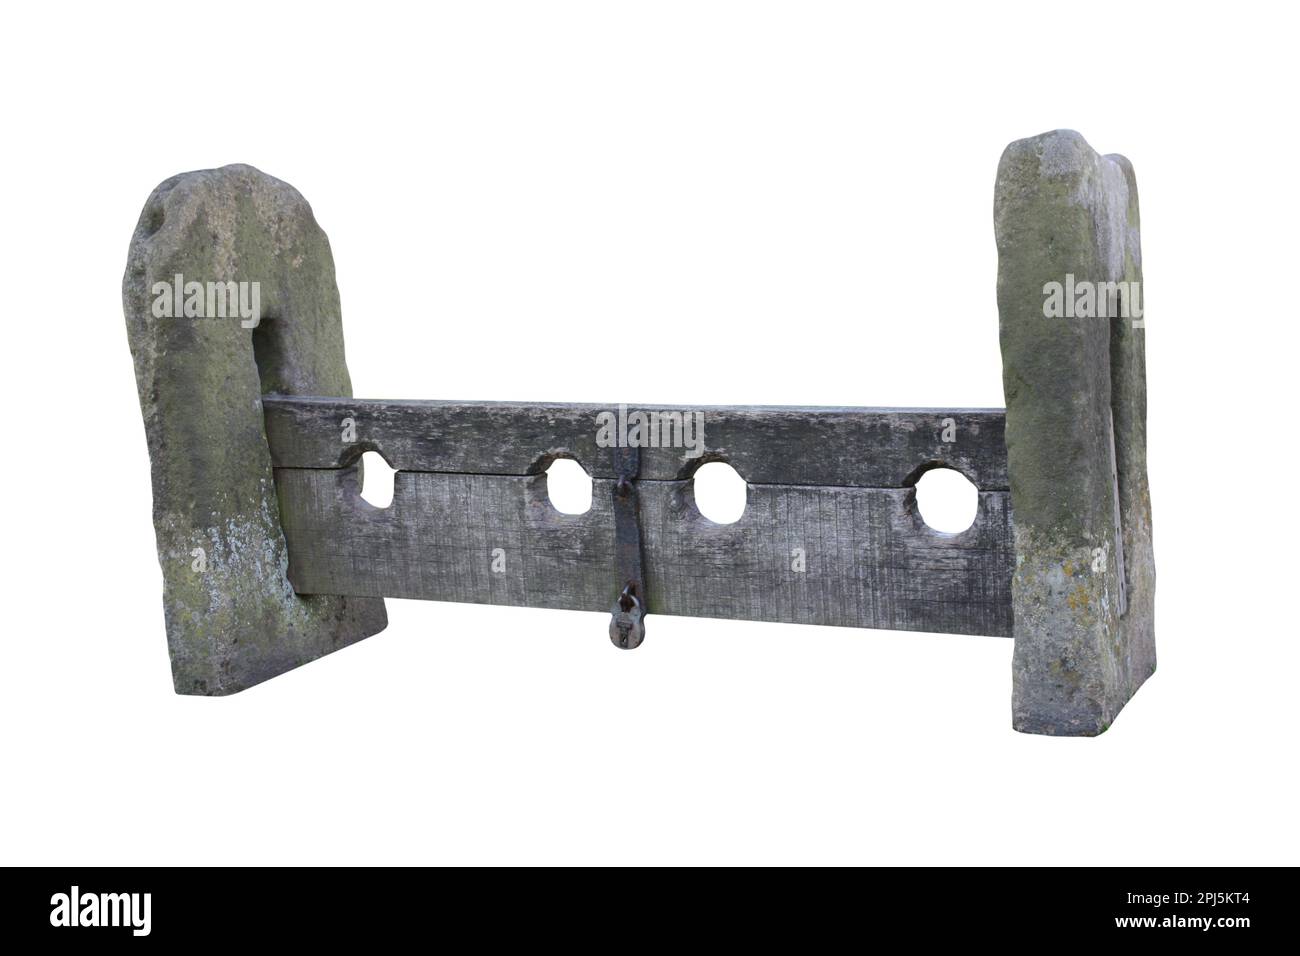 A Set of Stone and Wooden Medieval Stocks. Stock Photo